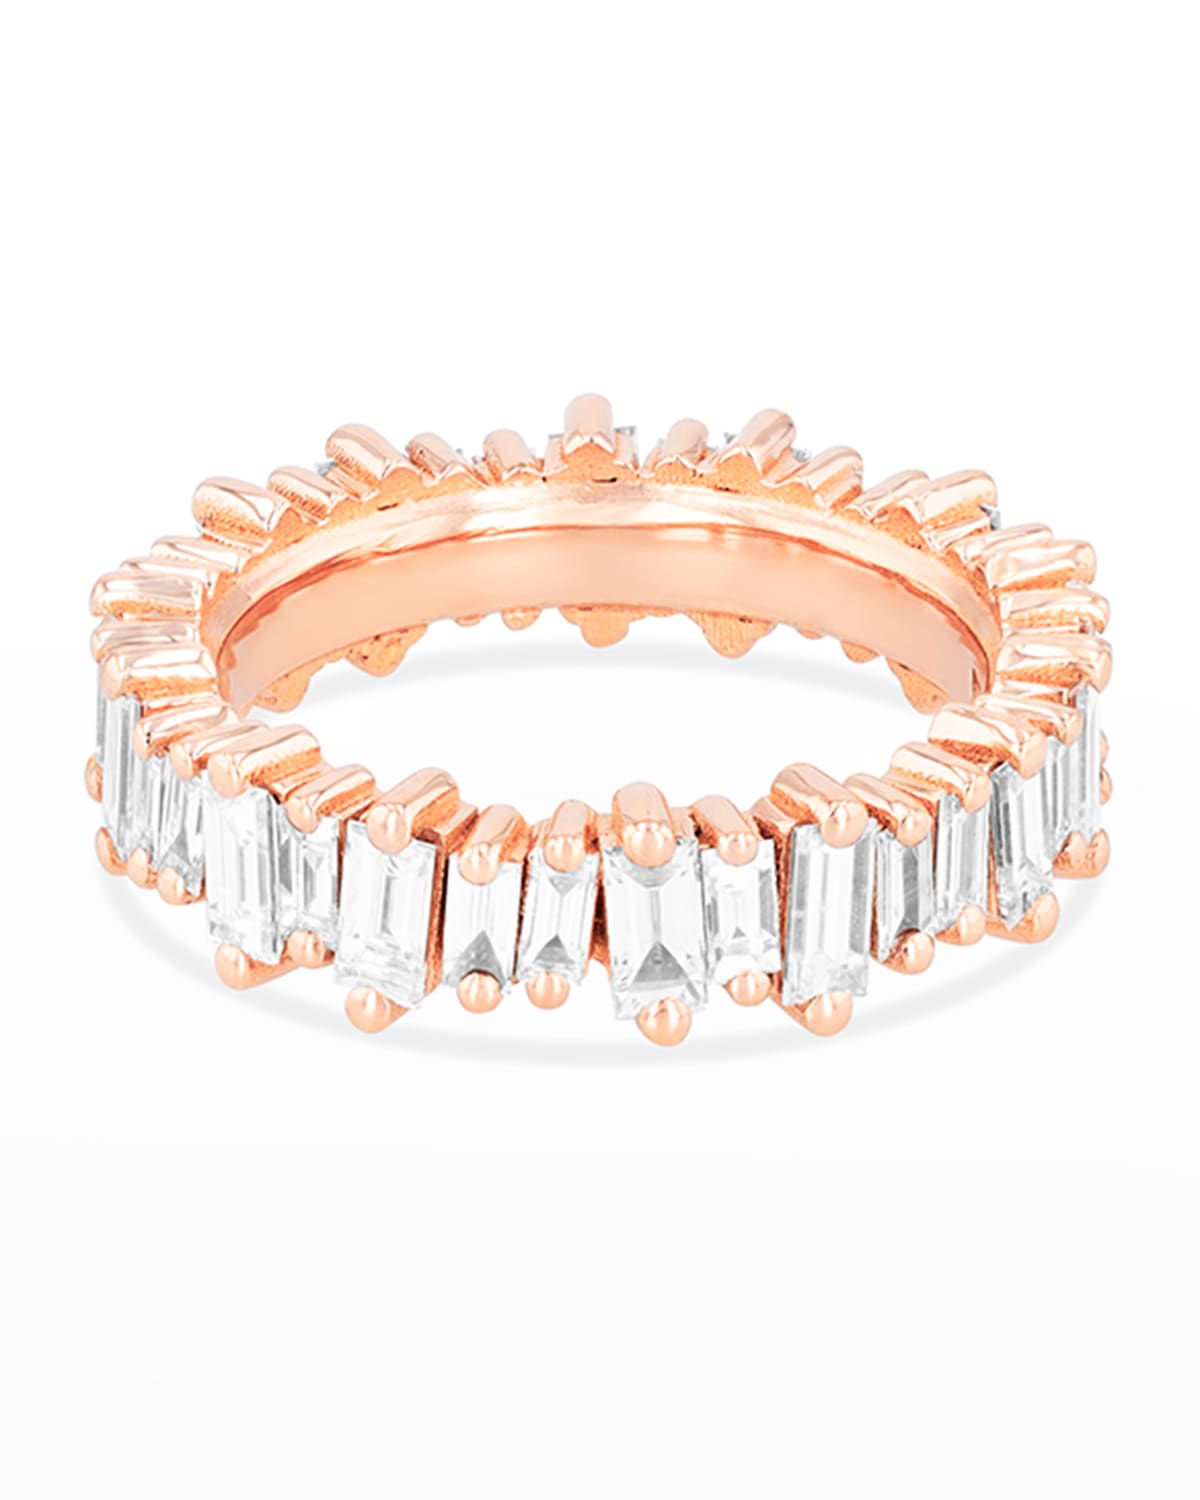 Suzanne Kalan 18k Diamond New Classic Eternity Band Ring Size 4-8 In Rose/gold